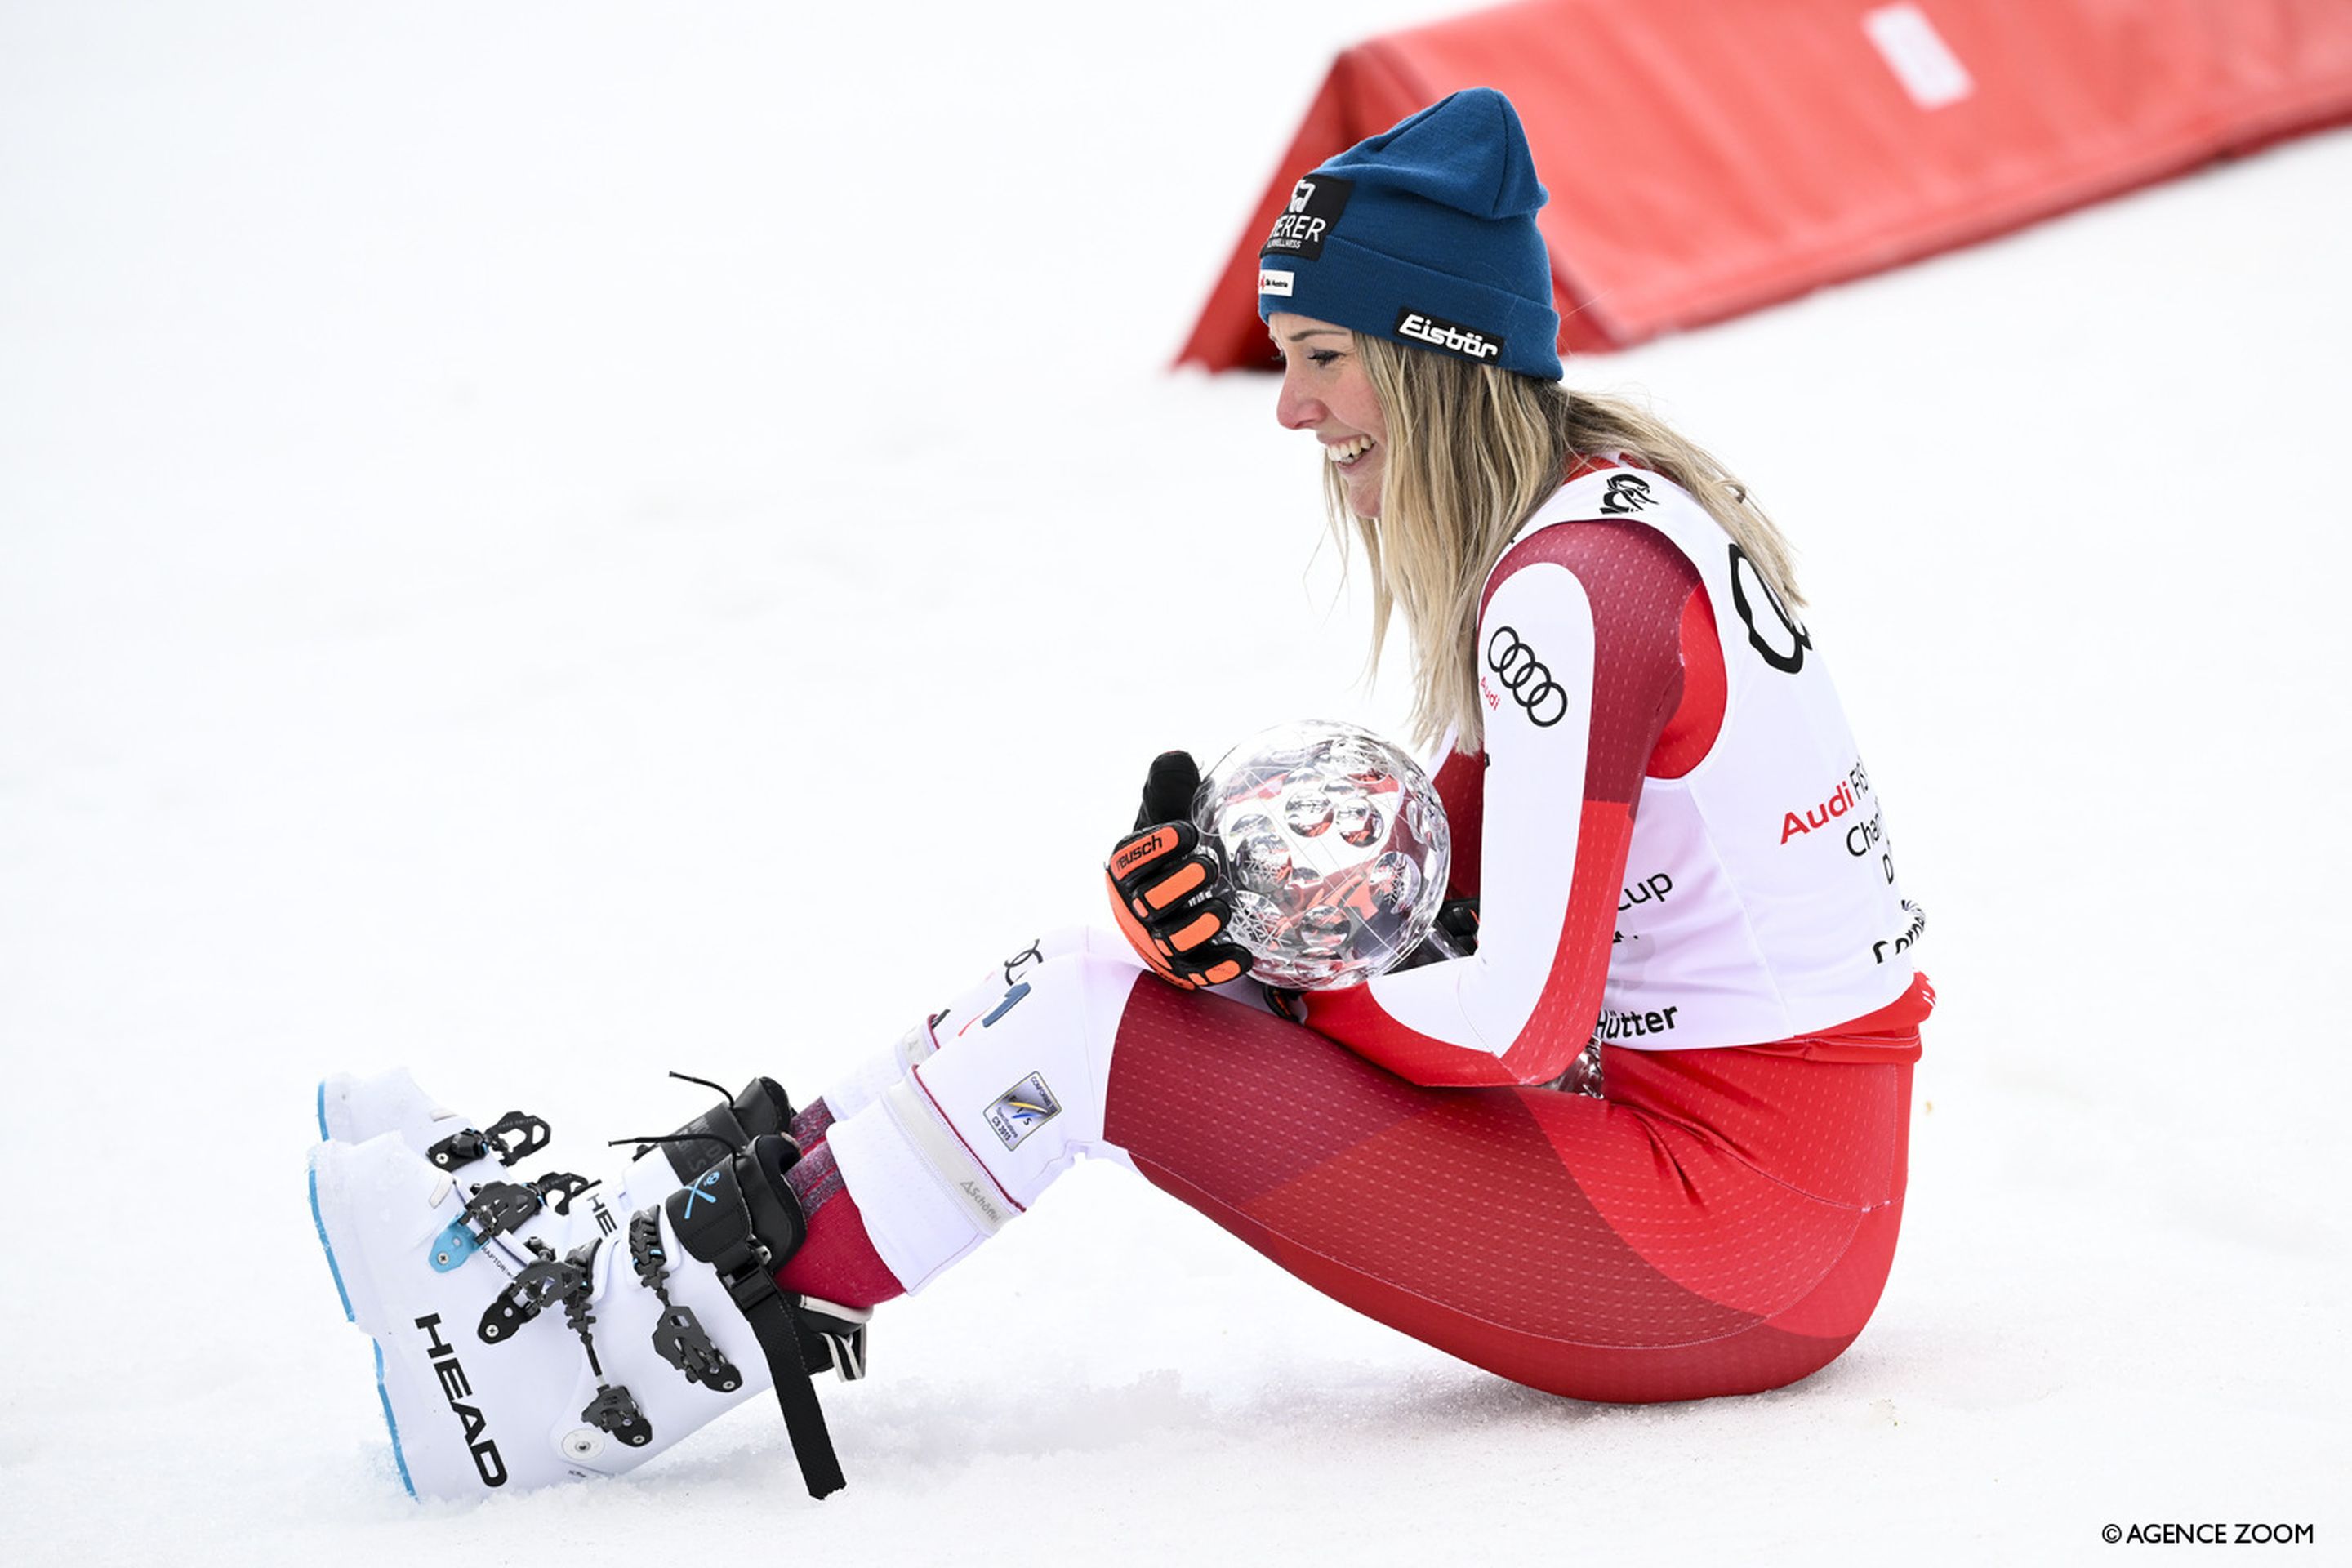 Conny Huetter (AUT) cradles her first crystal globe like a baby